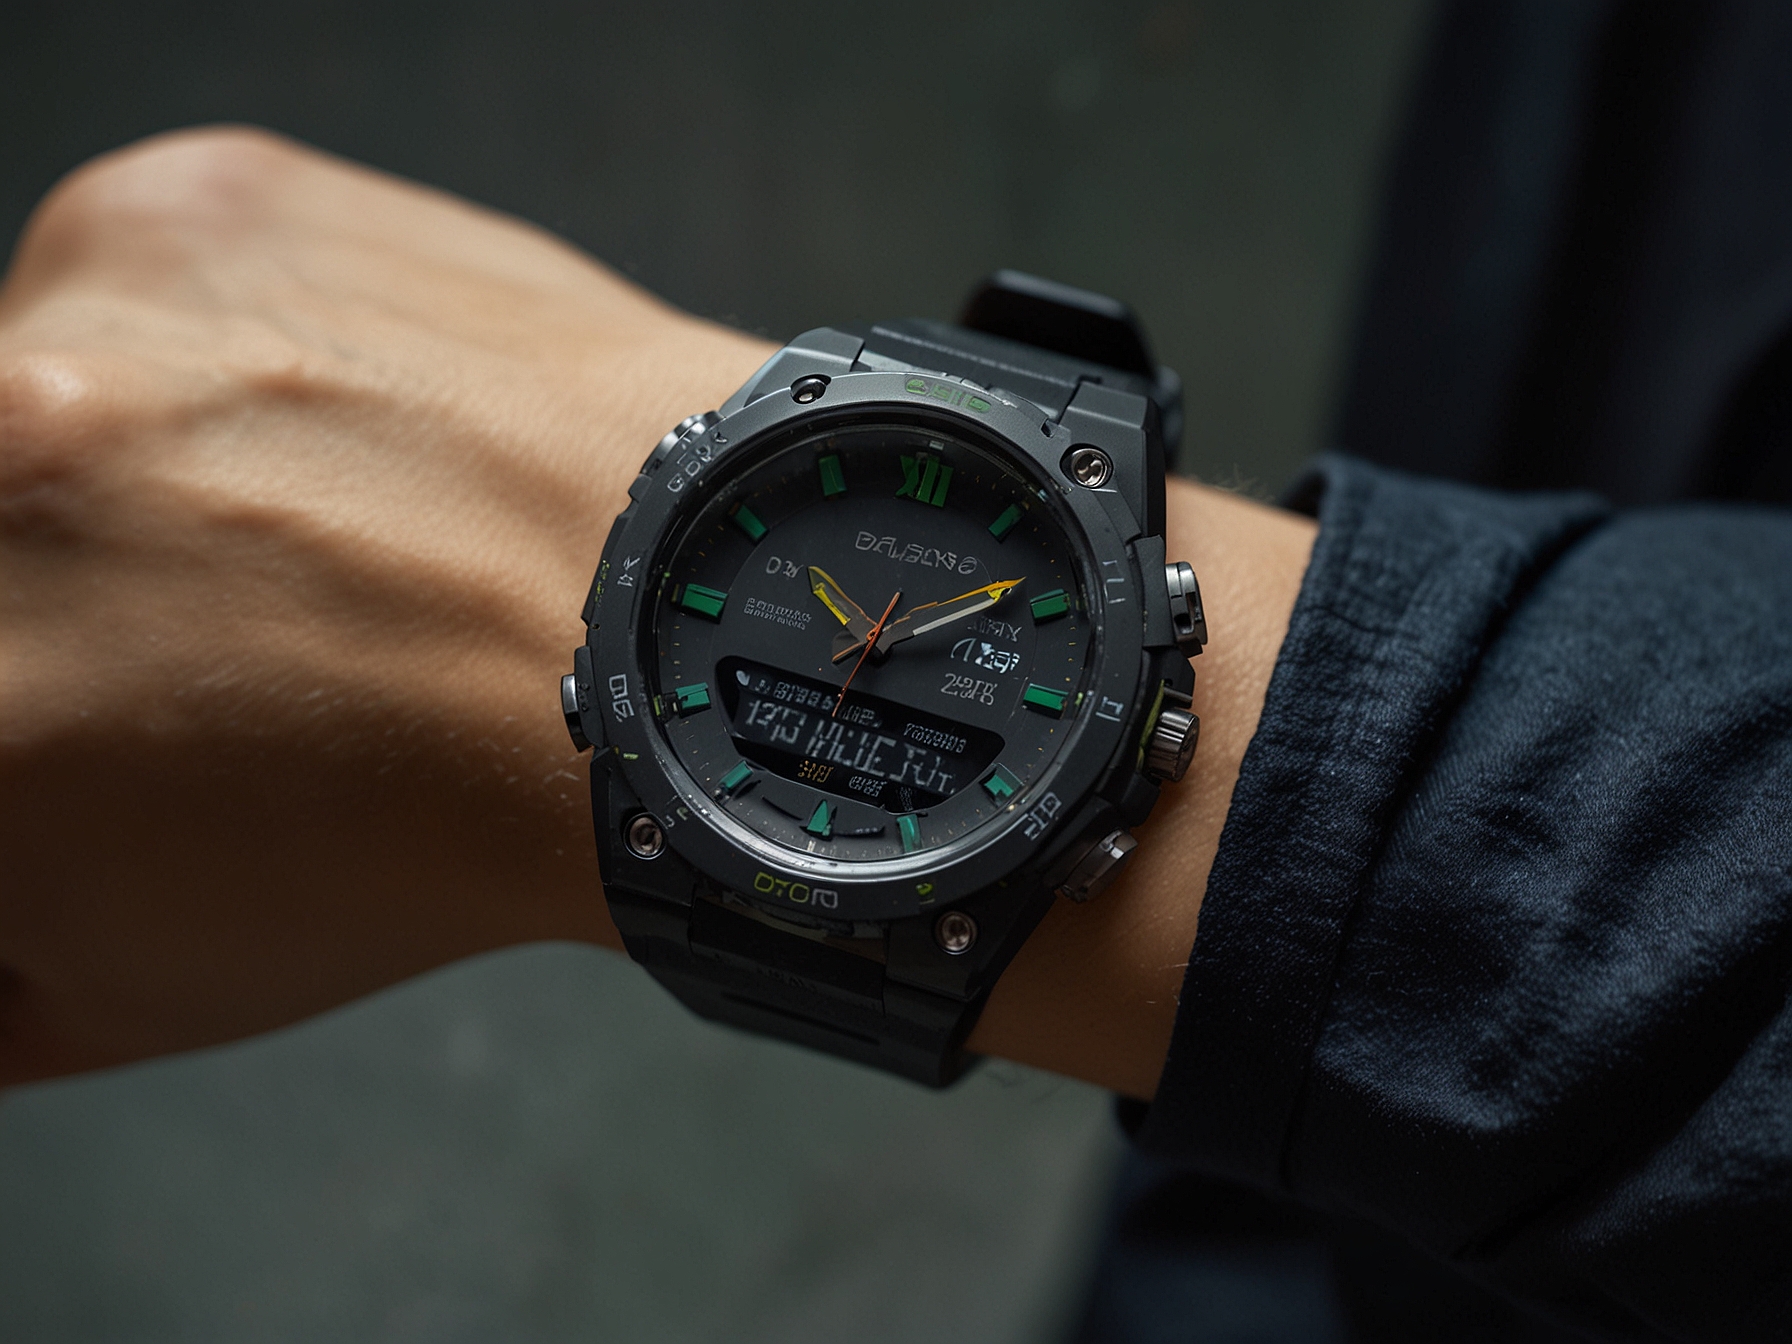 The Casio GBD-300 worn on a wrist, showcasing its new flexible, high-quality strap. The watch's comfortable fit is highlighted, suitable for long workouts and daily use.